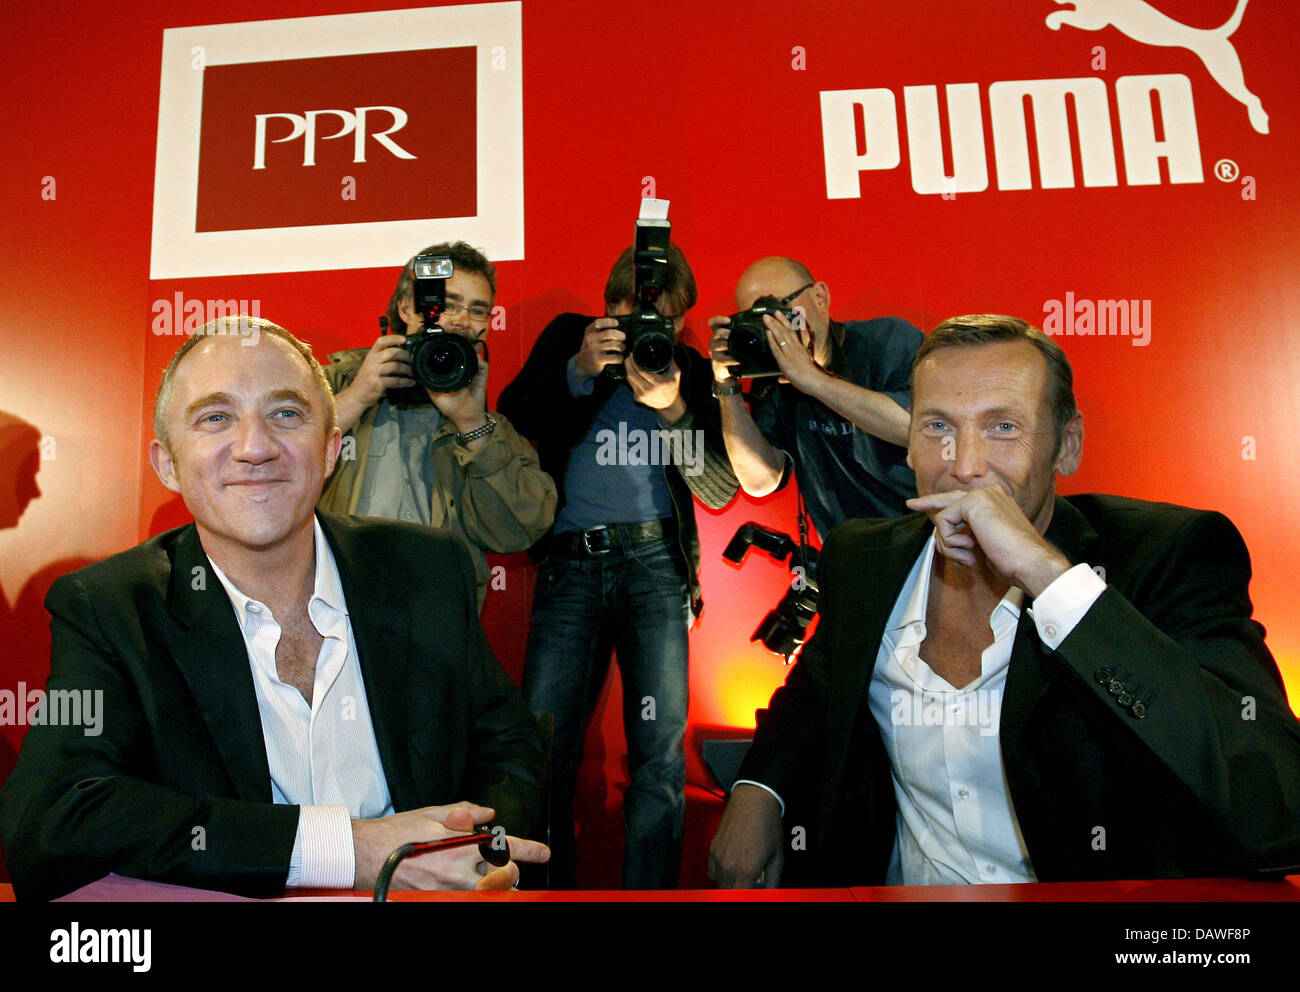 Photographers stand behind Puma AG CEO Jochen Zeitz (R) and French luxury  group Pinault-Printemps-Redoute's (PPR) chairman Francois-Henri Pinault  prior to a press conference in Nuremberg, Germany, Thursday 12 April 2007.  PPR, owner